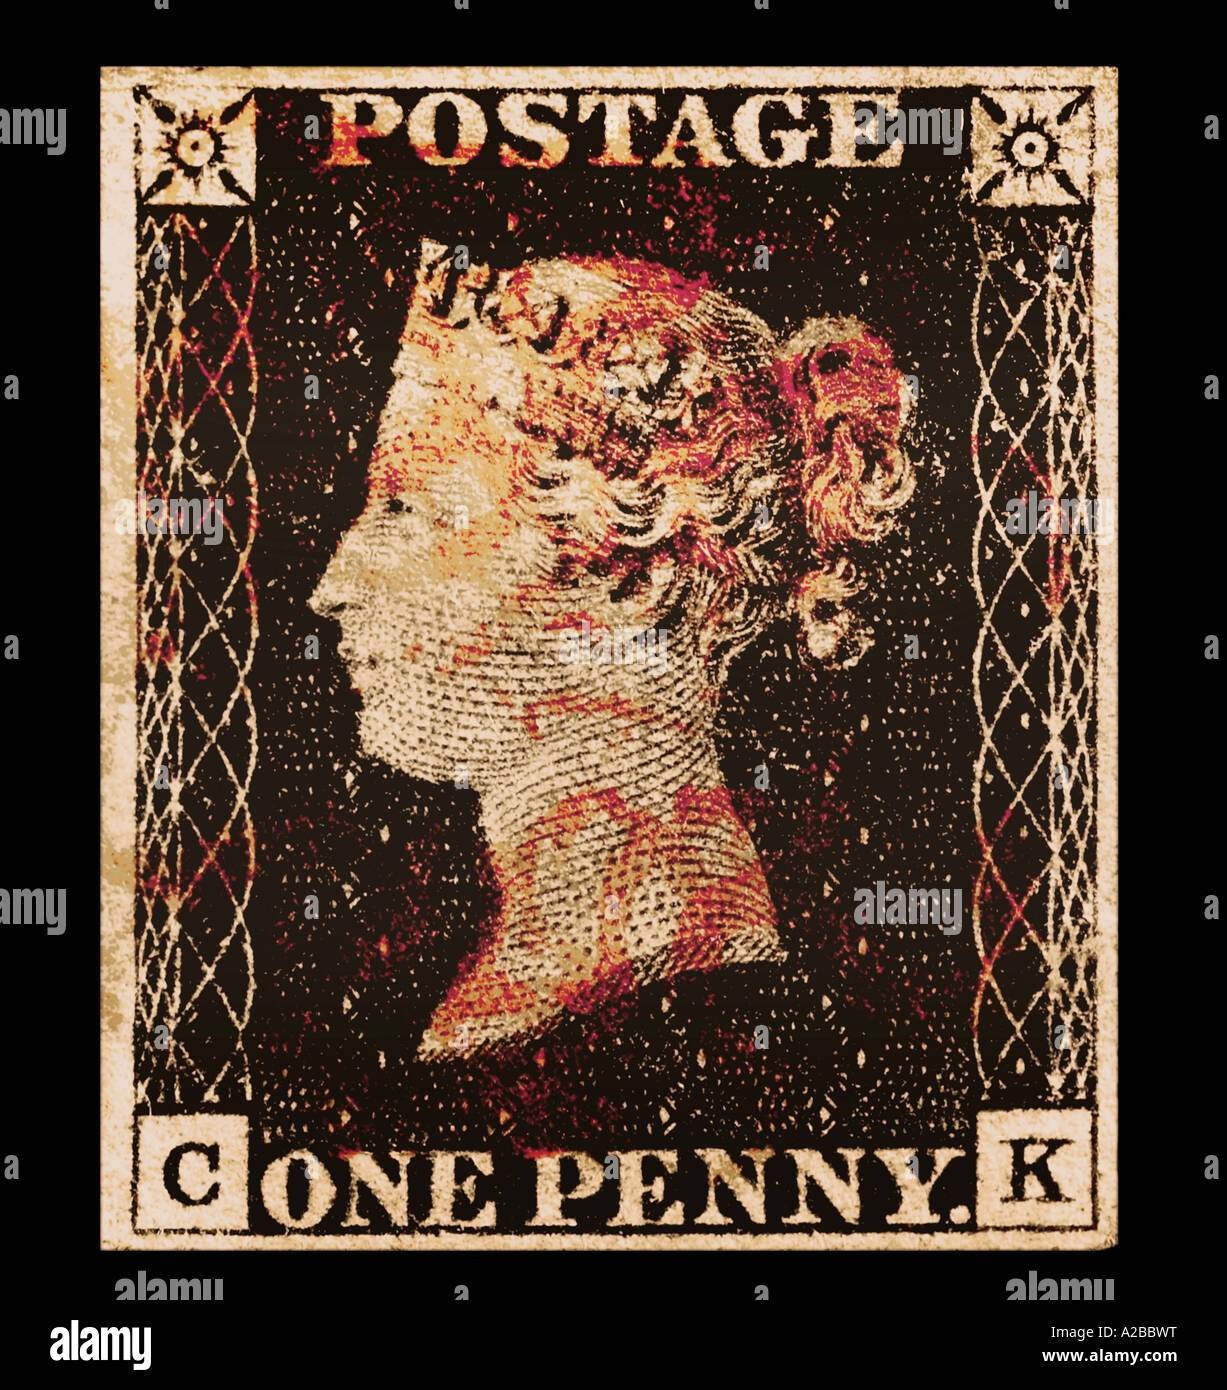 Penny Black Postage Stamp High Resolution Stock Photography and Images - Alamy